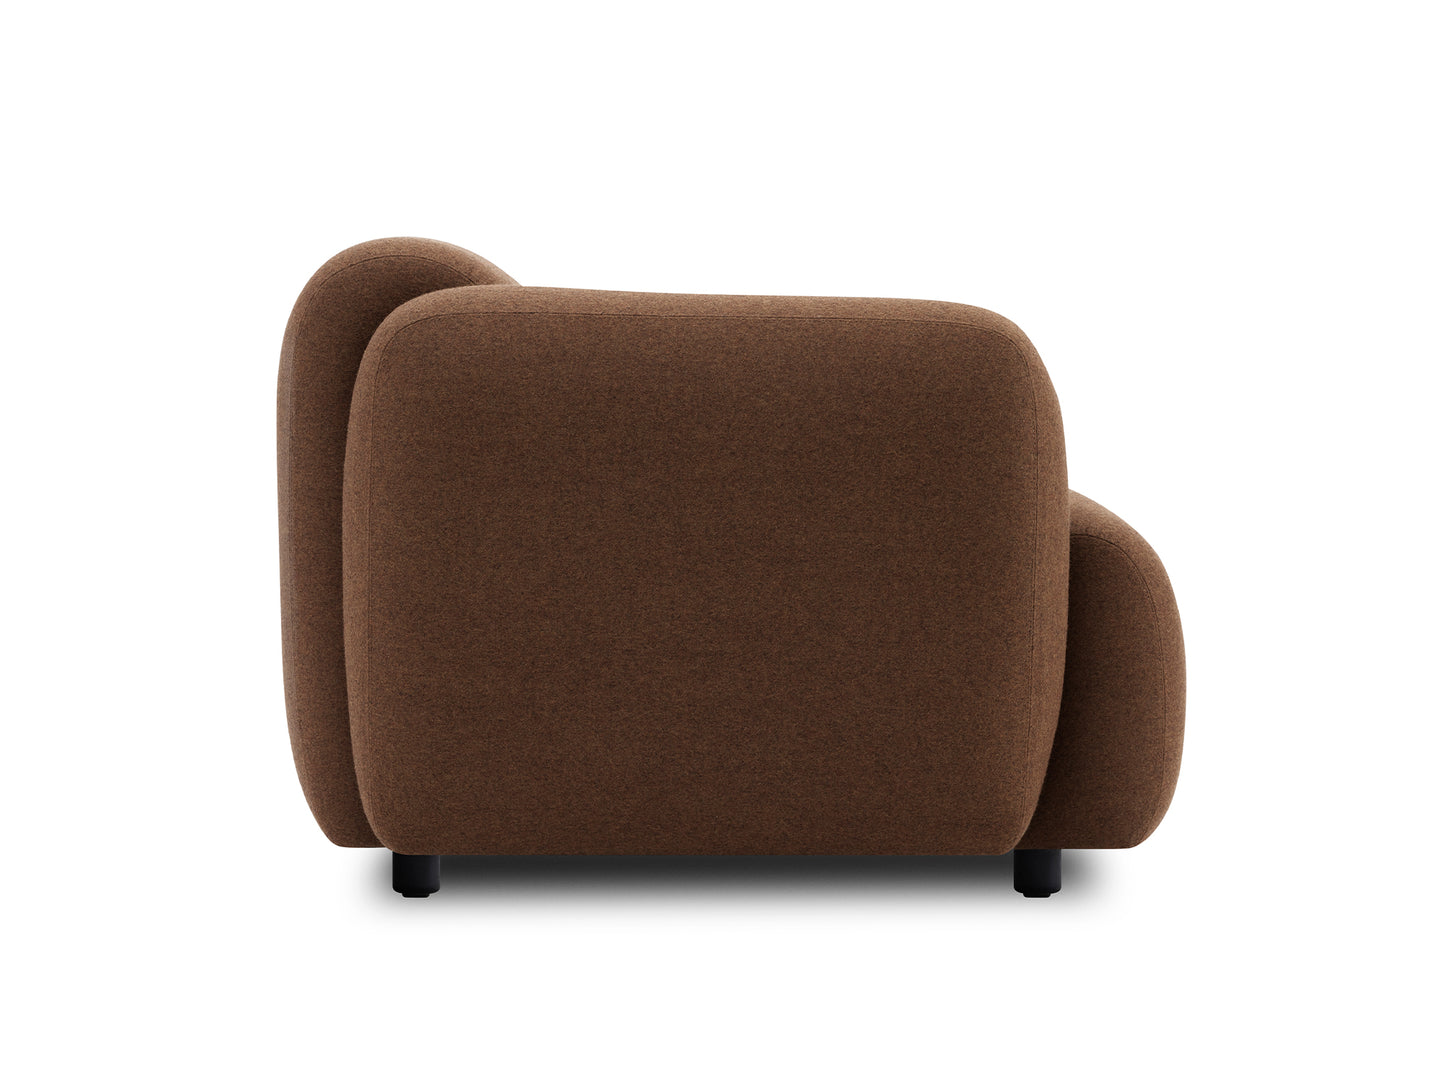 Swell 2-Seater Modular Sofa by Normann Copenhagen - Synergy Collective LDS39